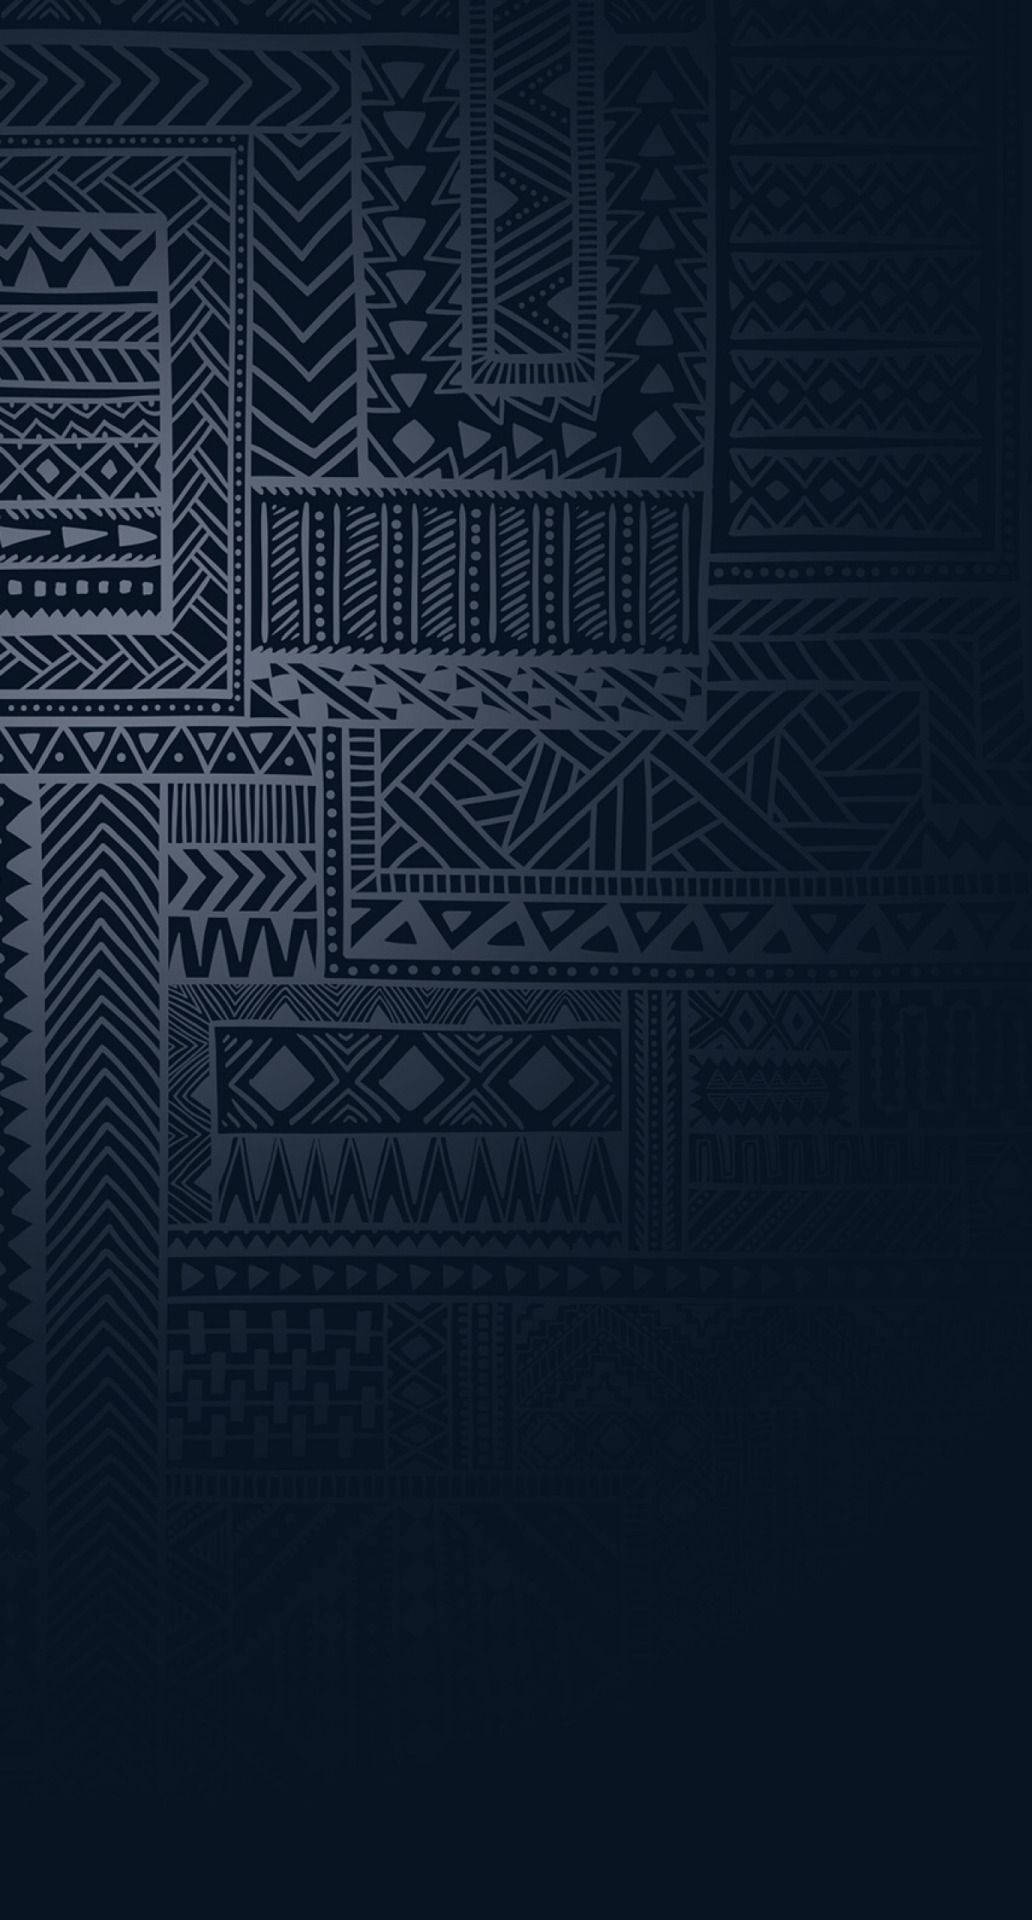 Tribal Patterns On Awesome Phone Wallpaper